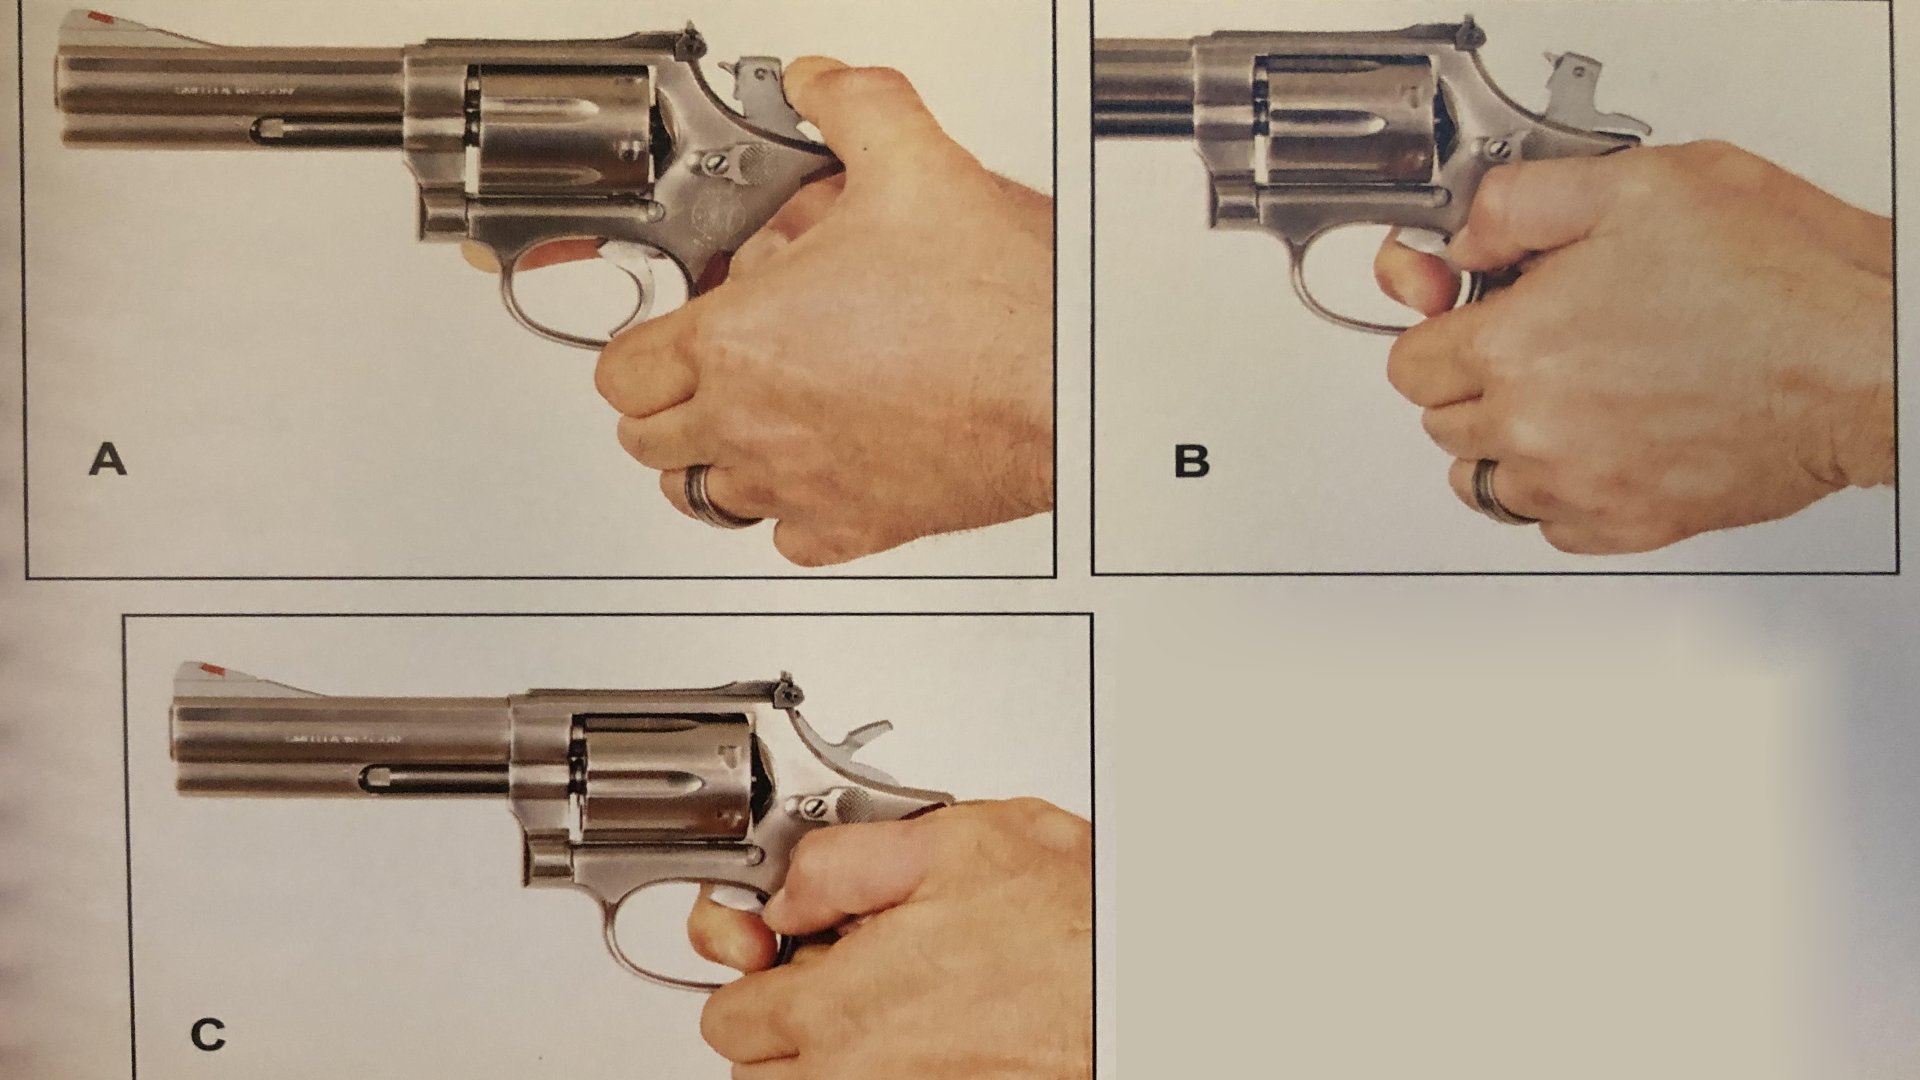 Double action revolver in single action mode